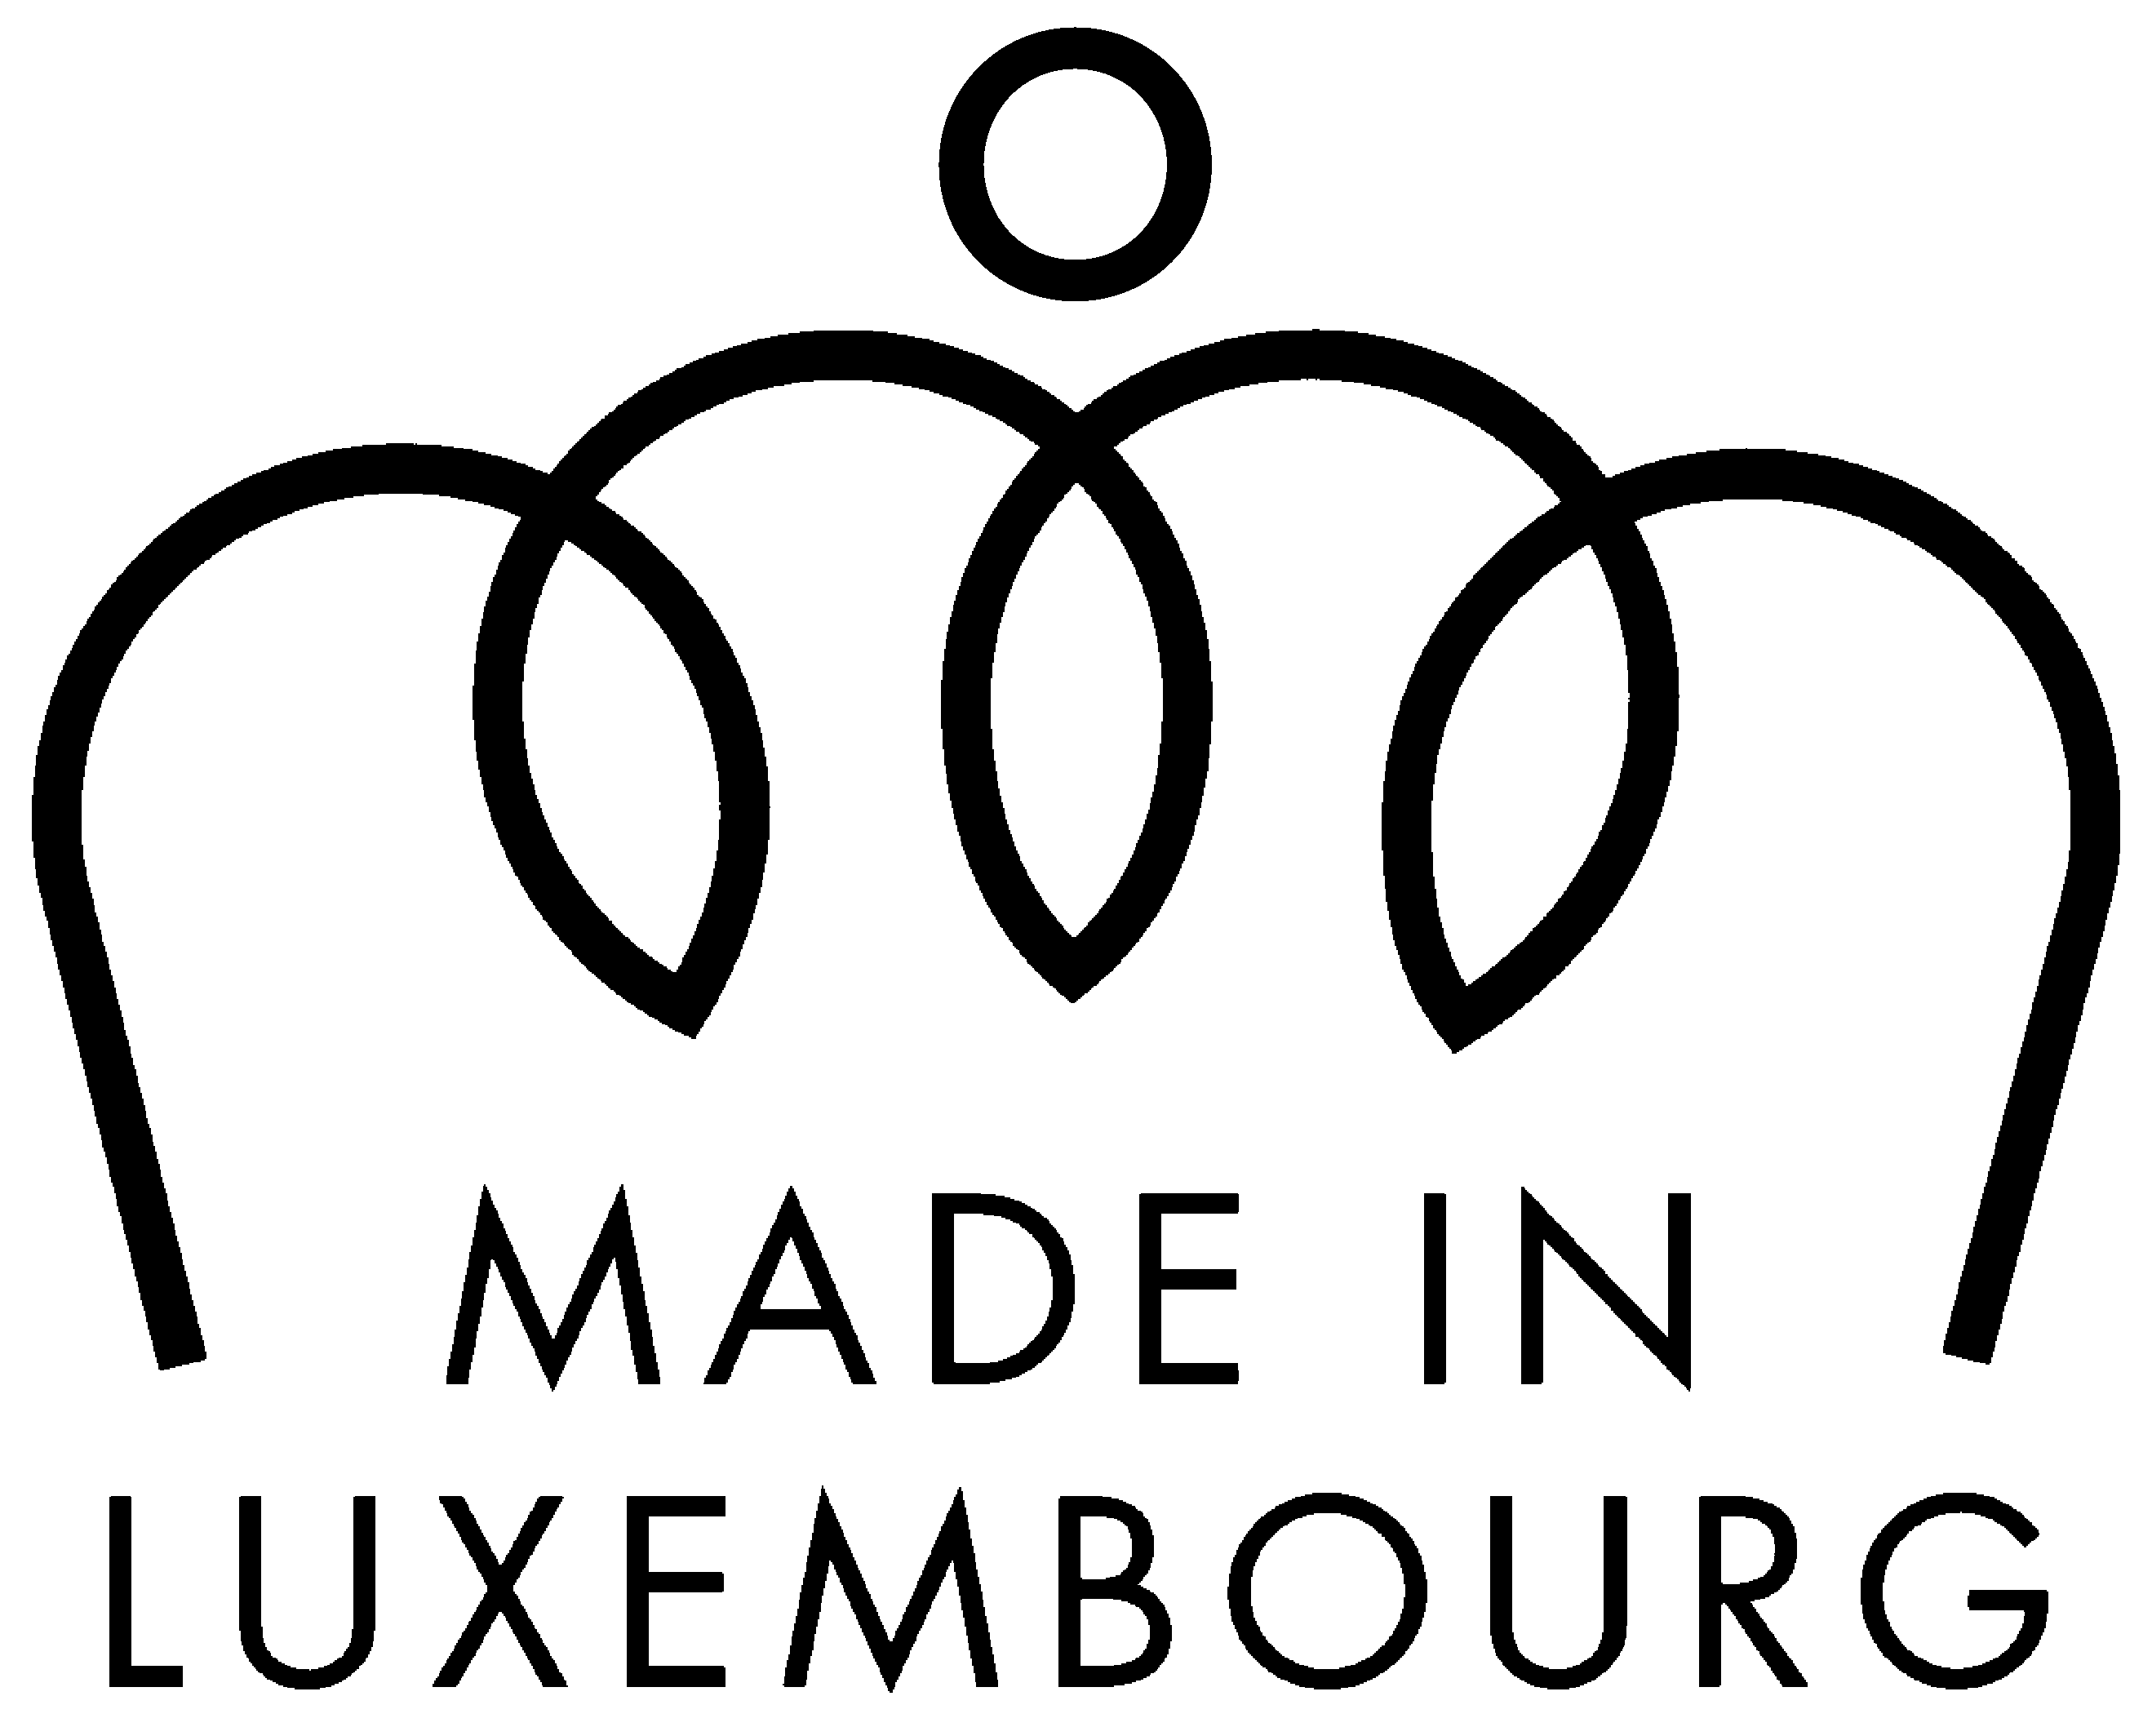 Label “Made in Luxembourg”